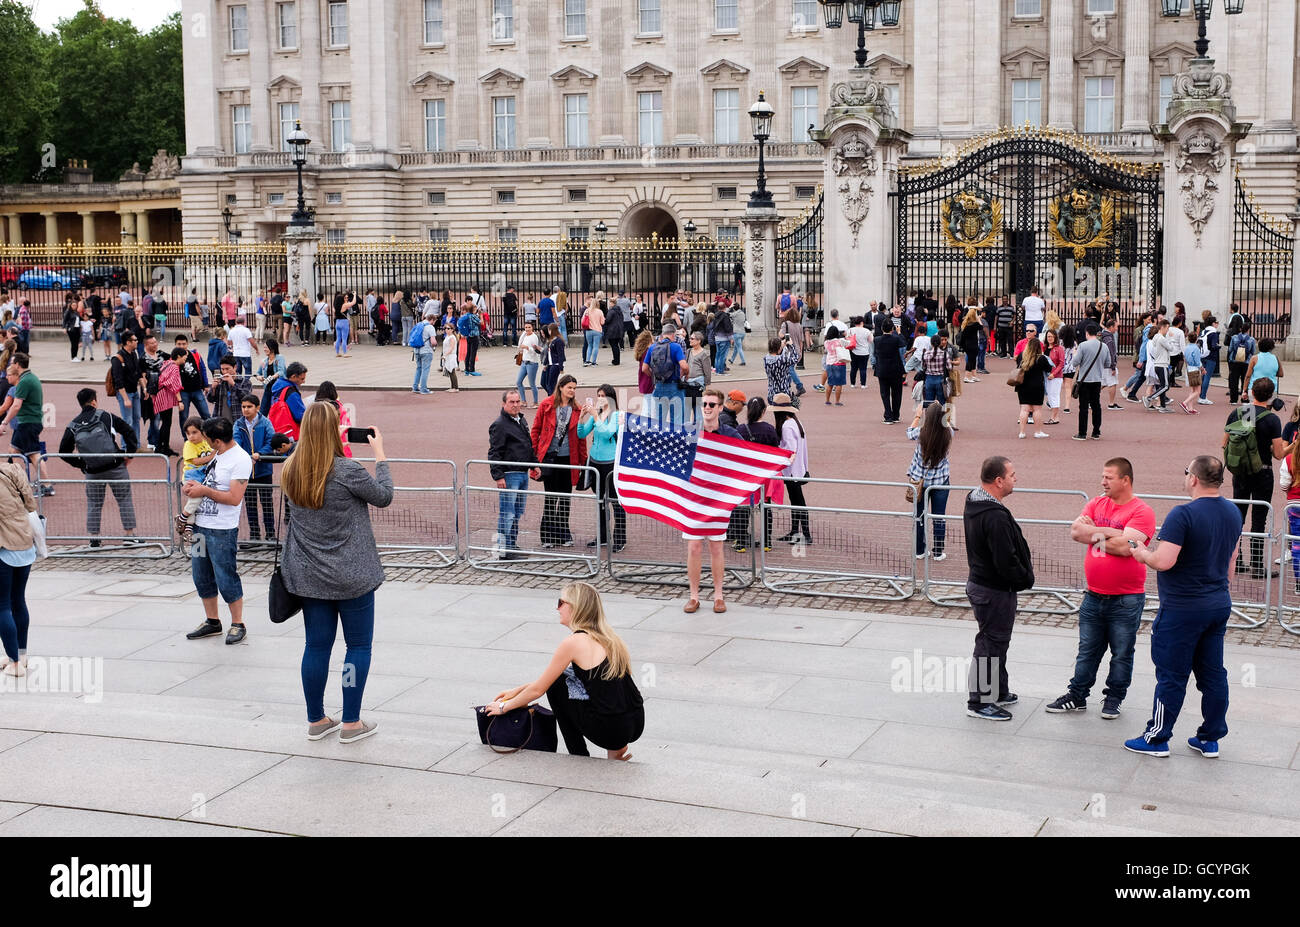 Tourists with an American flag of the stars and stripes taking selfie photographs outside Buckingham Palace London UK Stock Photo